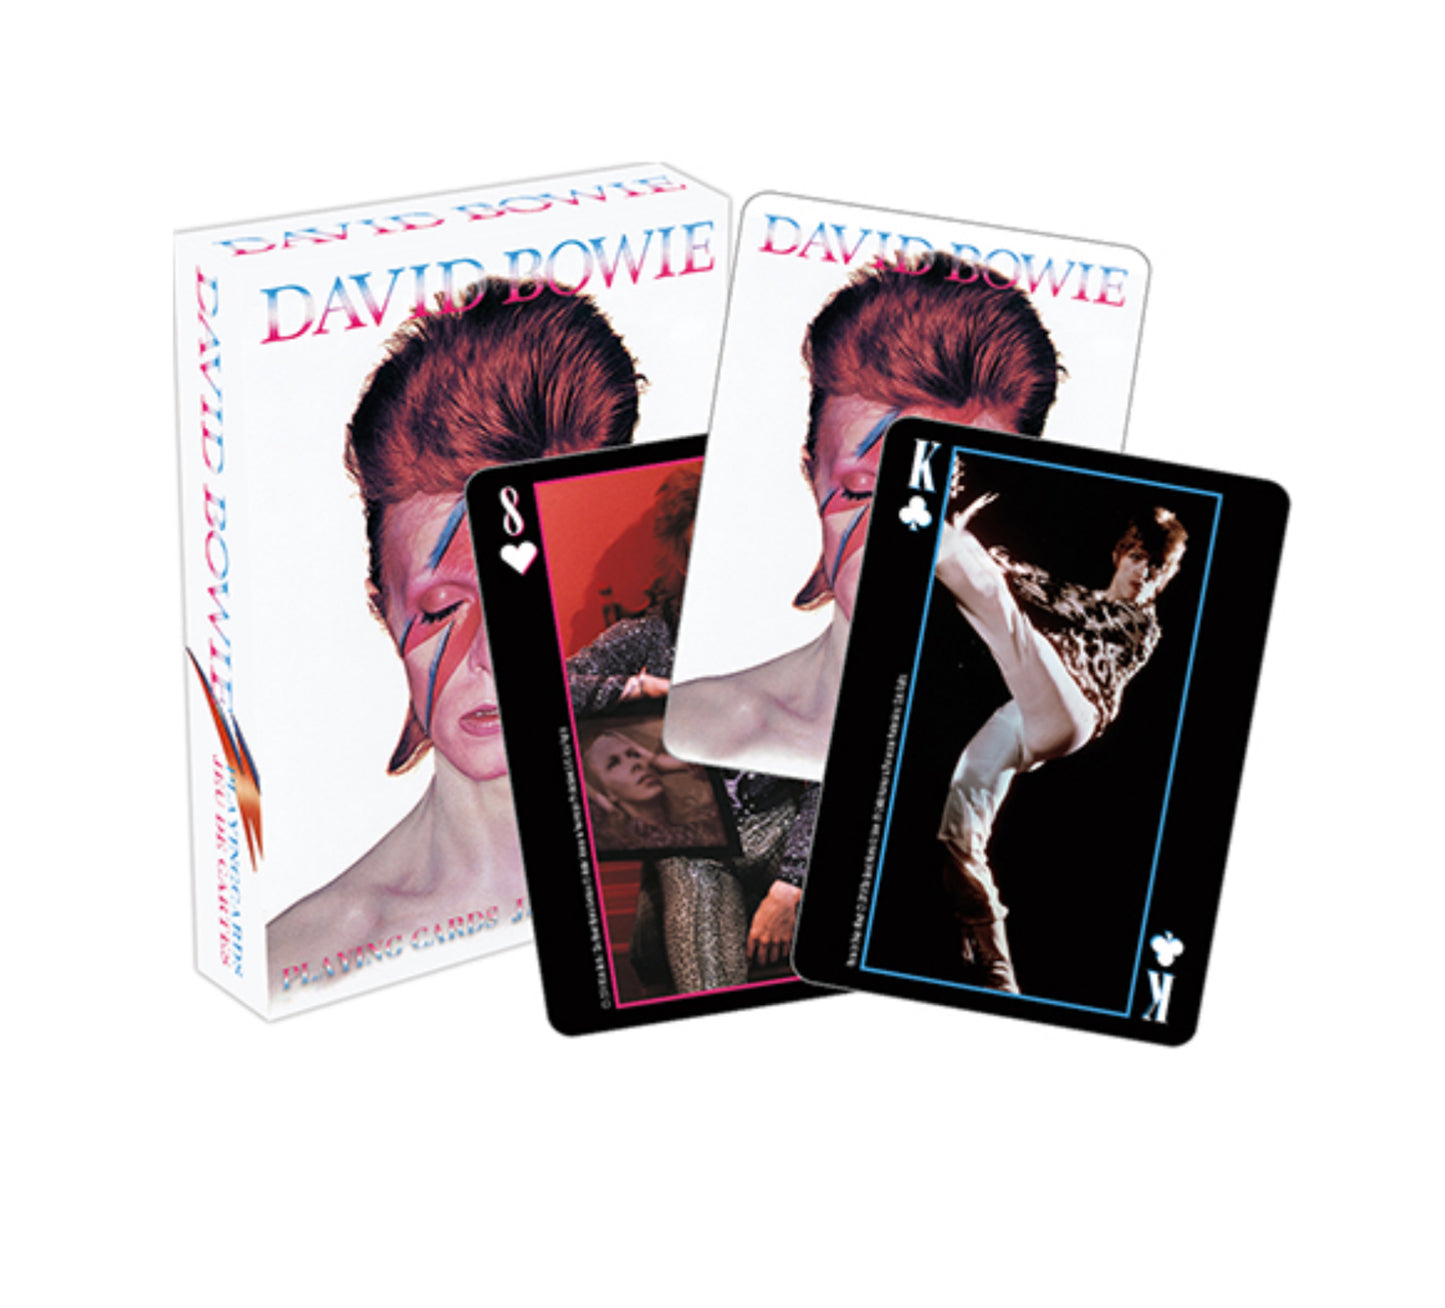 Assorted Playing Cards